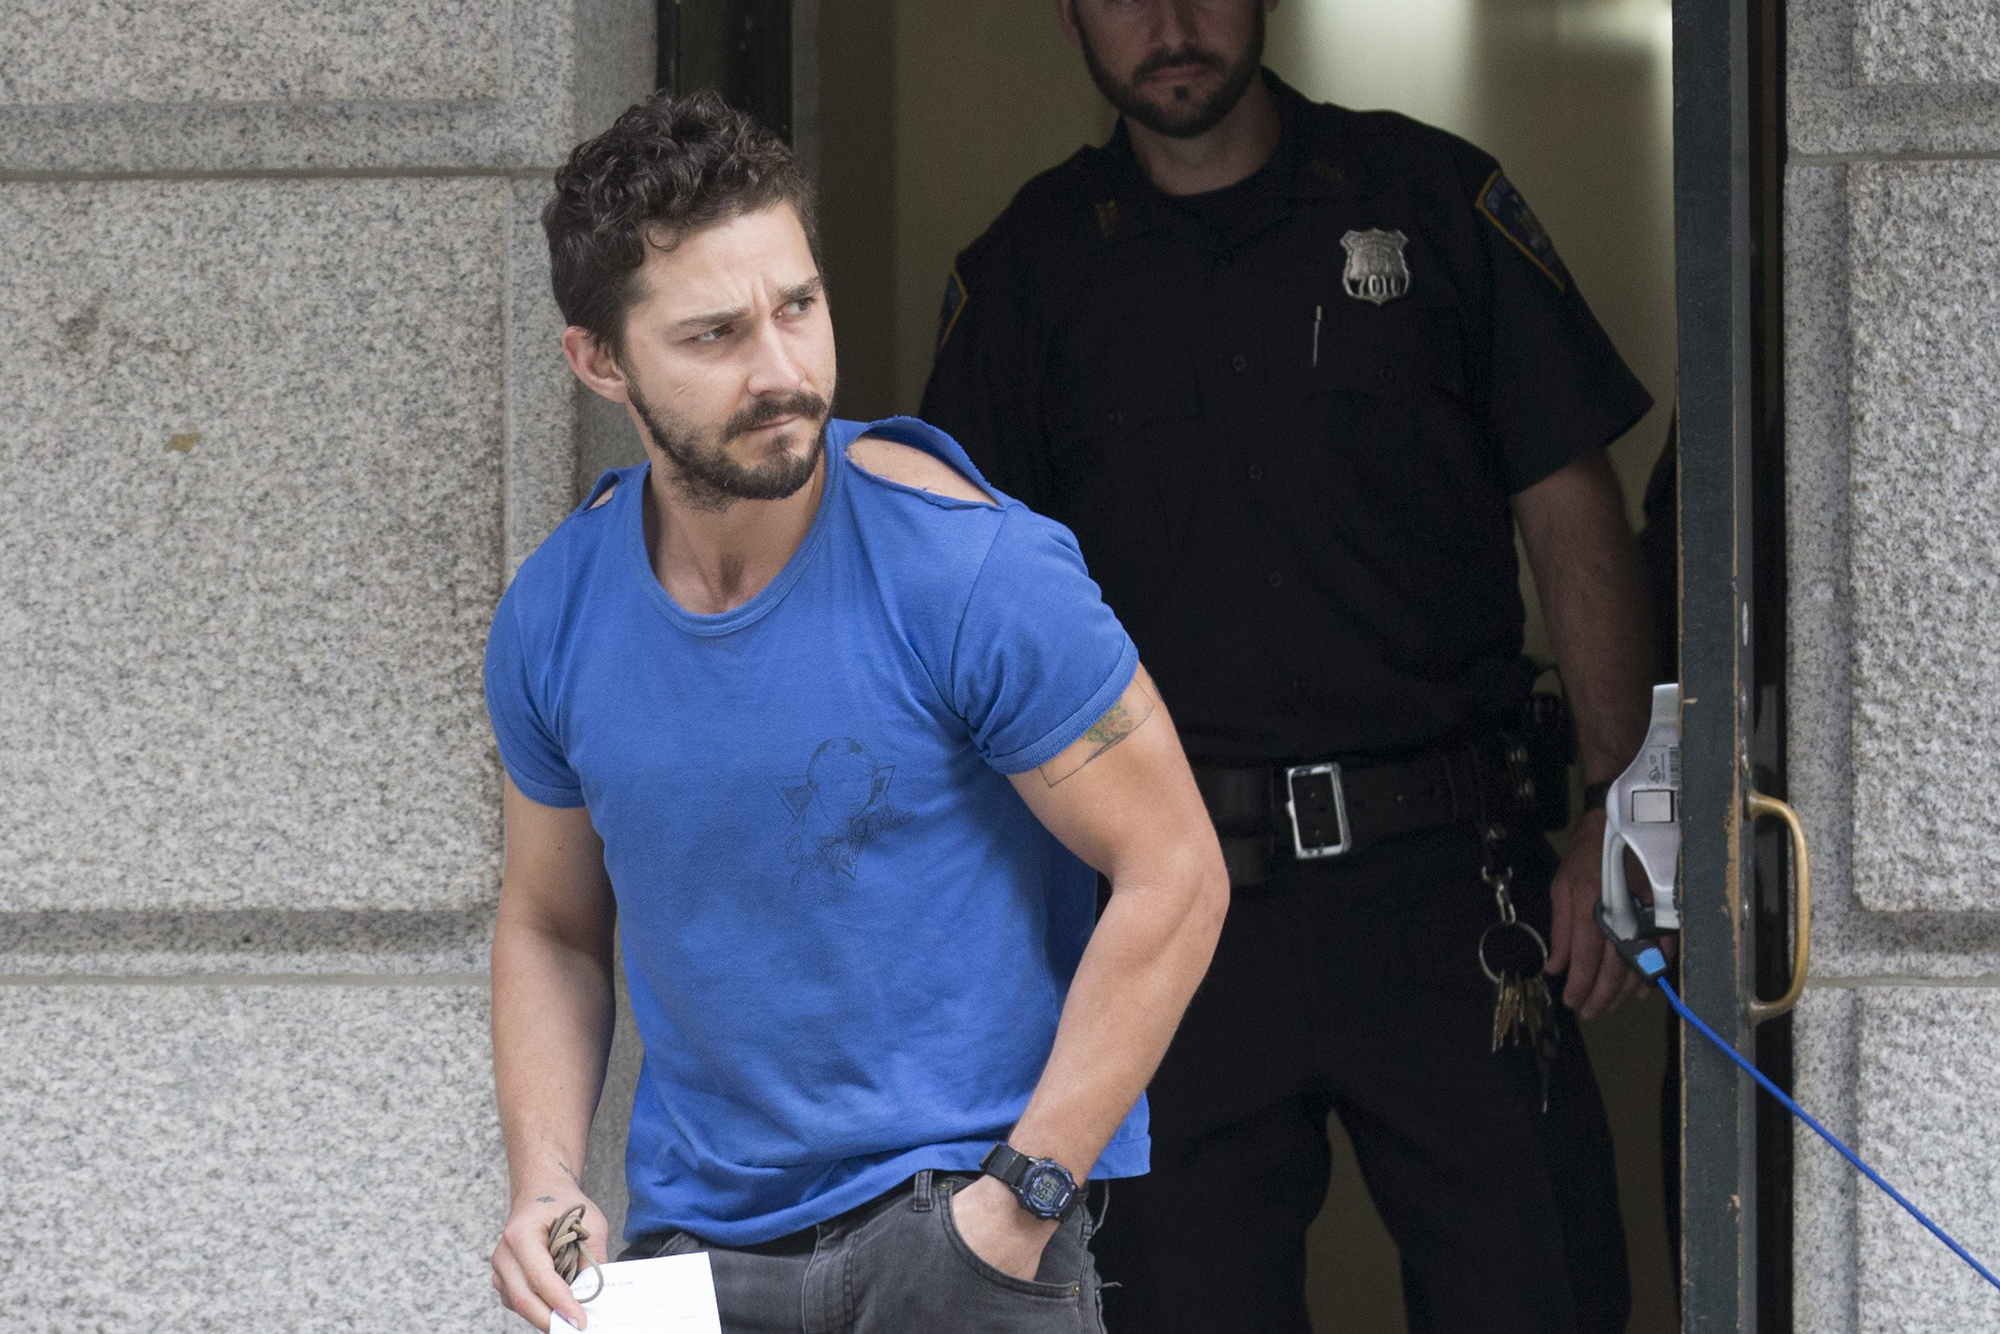 Actor Shia LaBeouf leaves Midtown Community Court after being arrested the previous day for yelling obscenities at the Broadway show "Cabaret," June 27, 2014, in New York. (John Minchillo—AP)